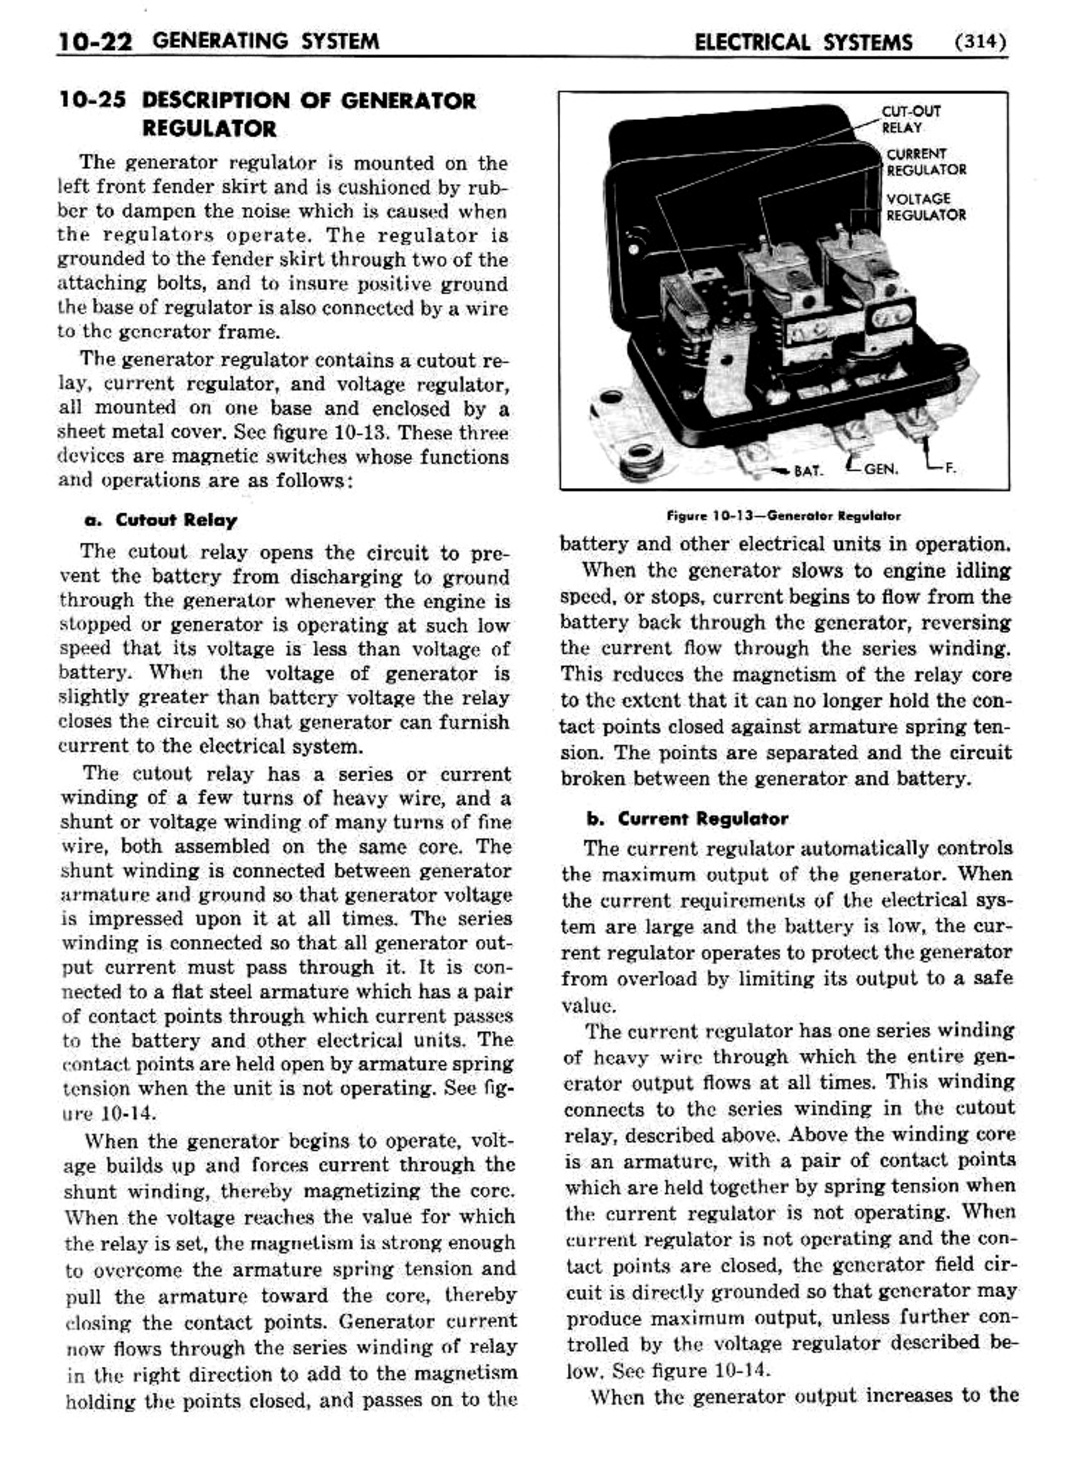 n_11 1951 Buick Shop Manual - Electrical Systems-022-022.jpg